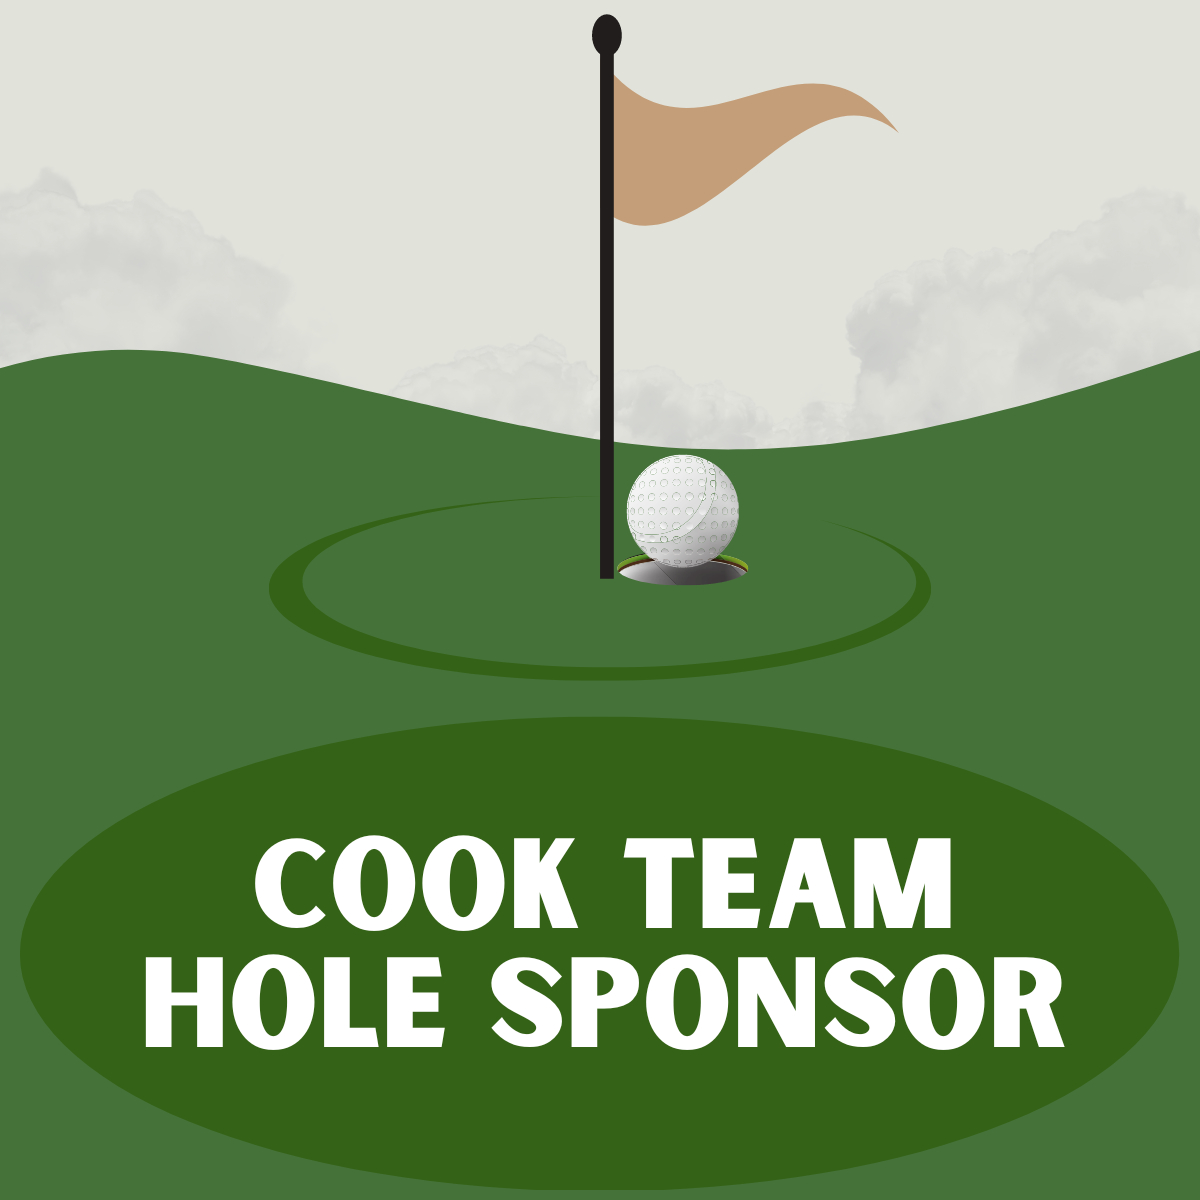 Cook Team Hole Sponsor - New Mexico Open